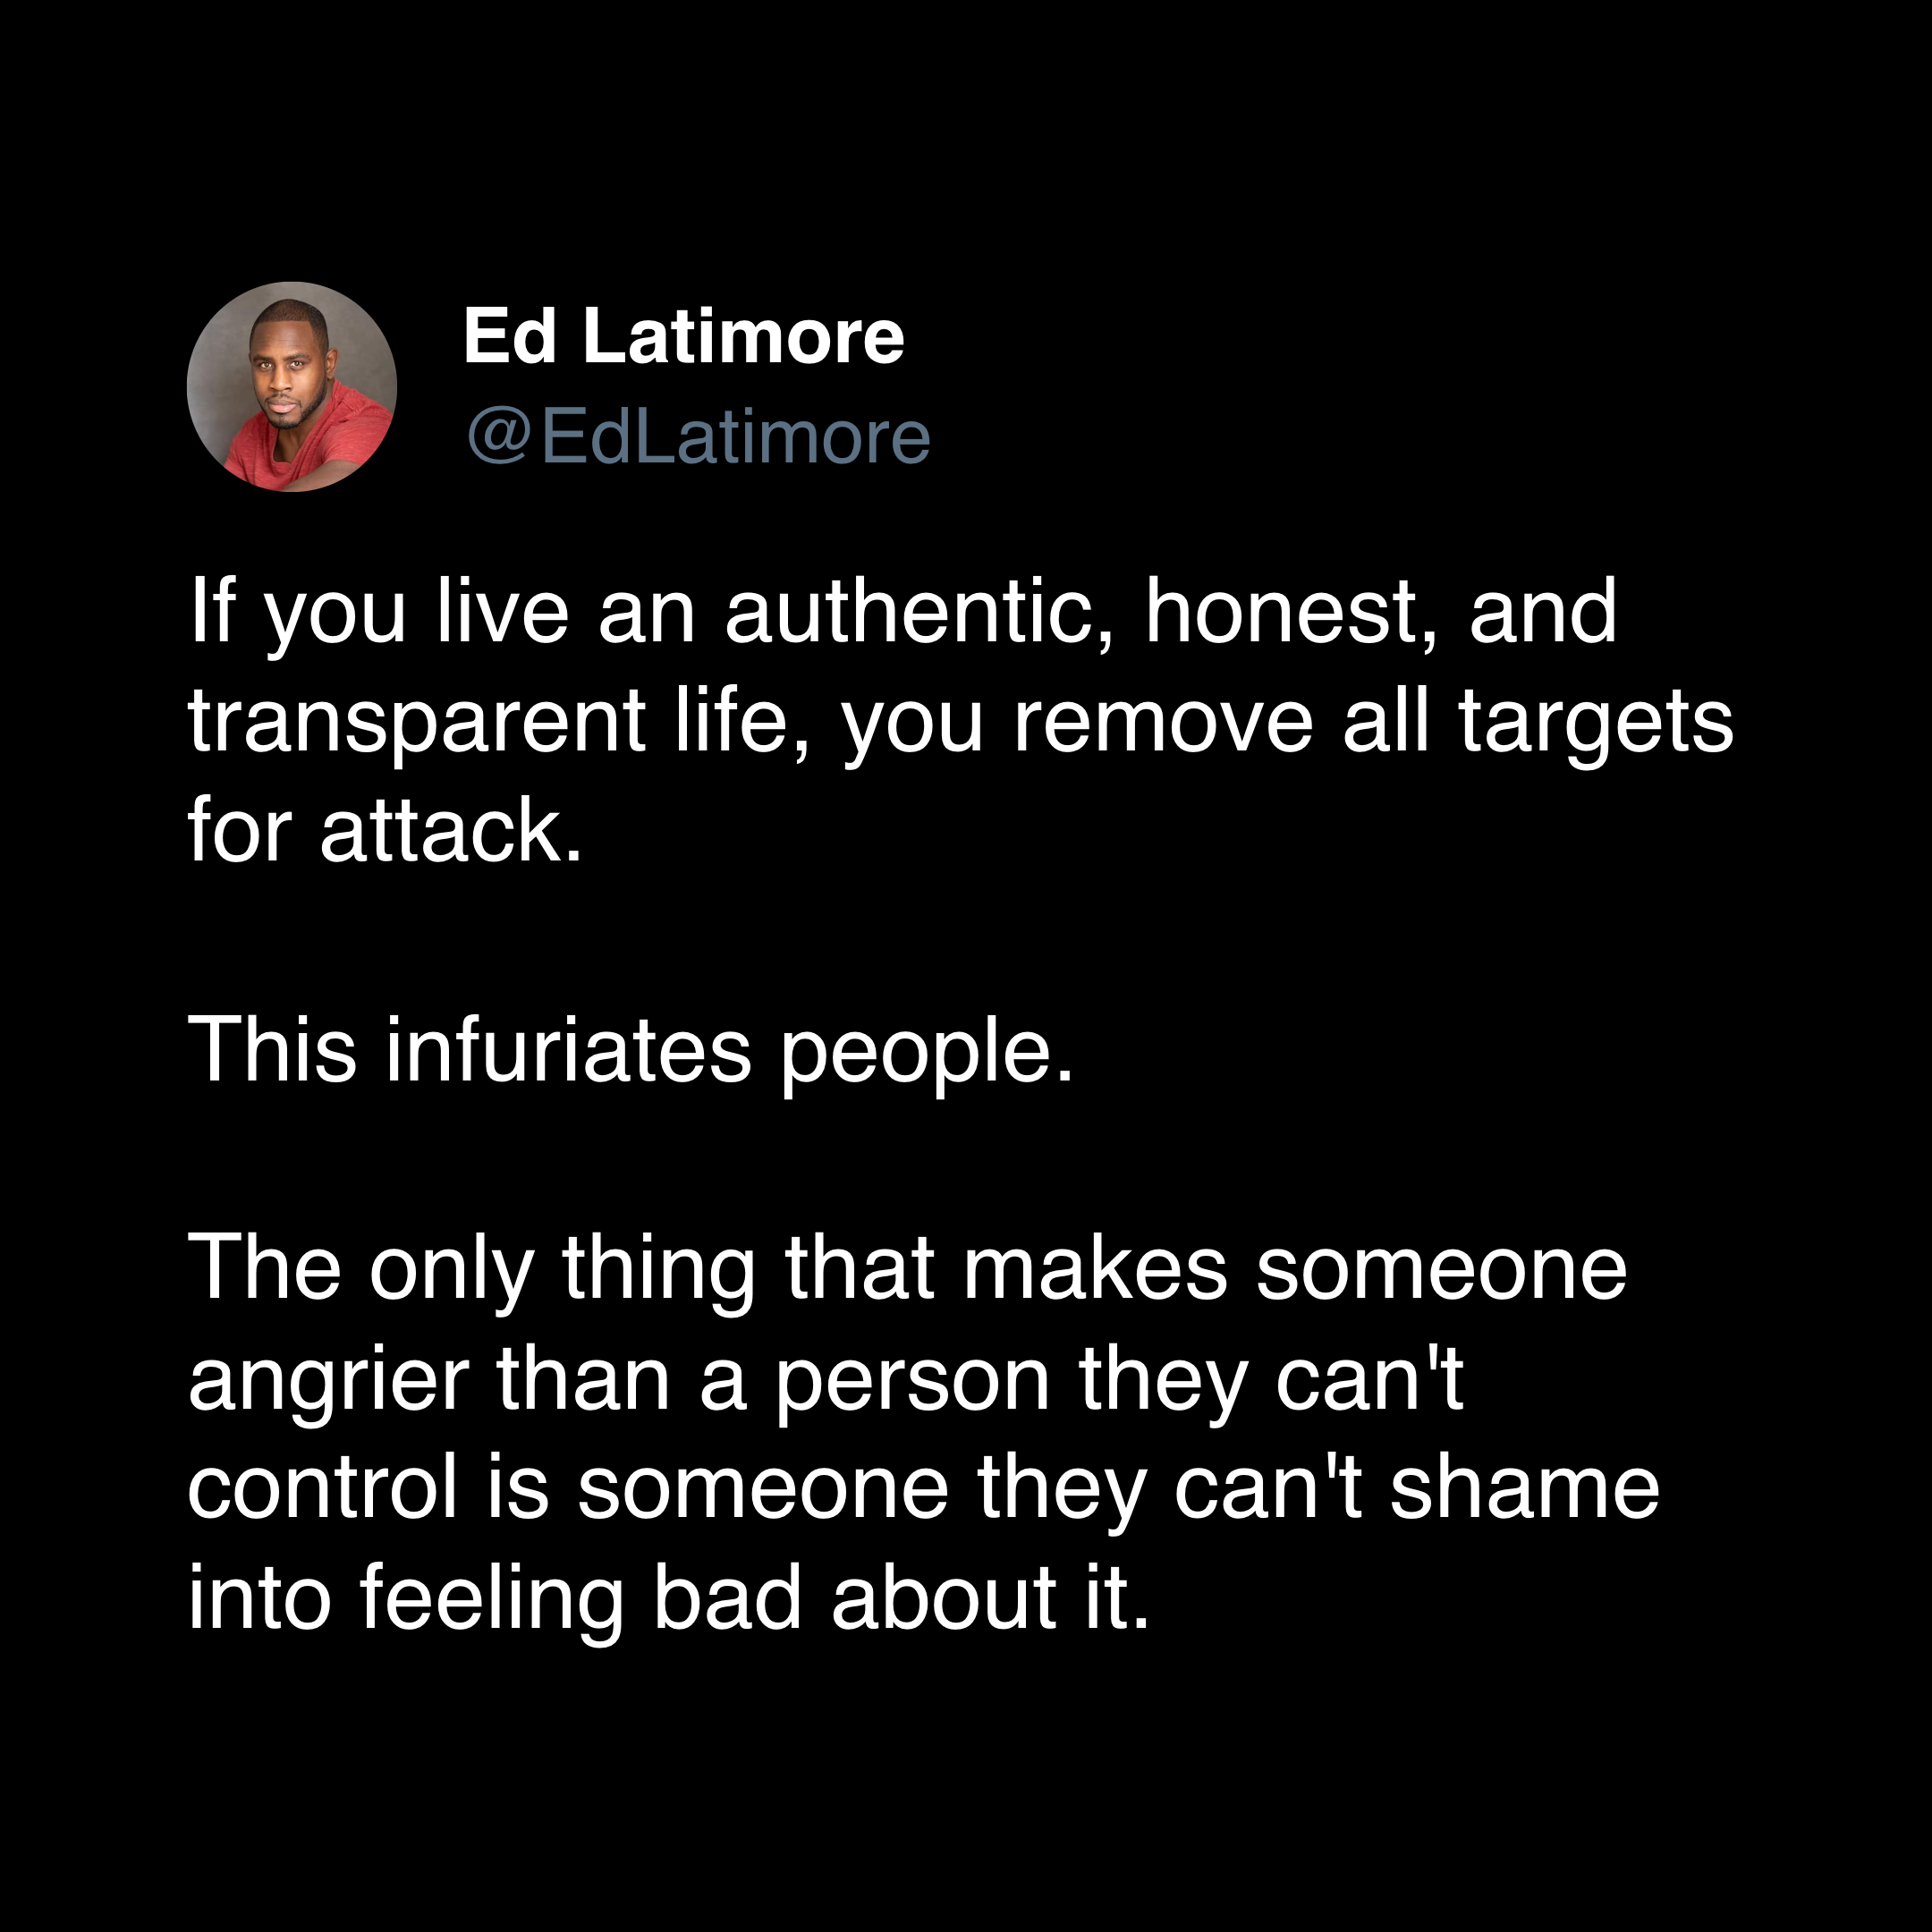 ed latimore authenticity quotes "authenticity removes all targets for attack"